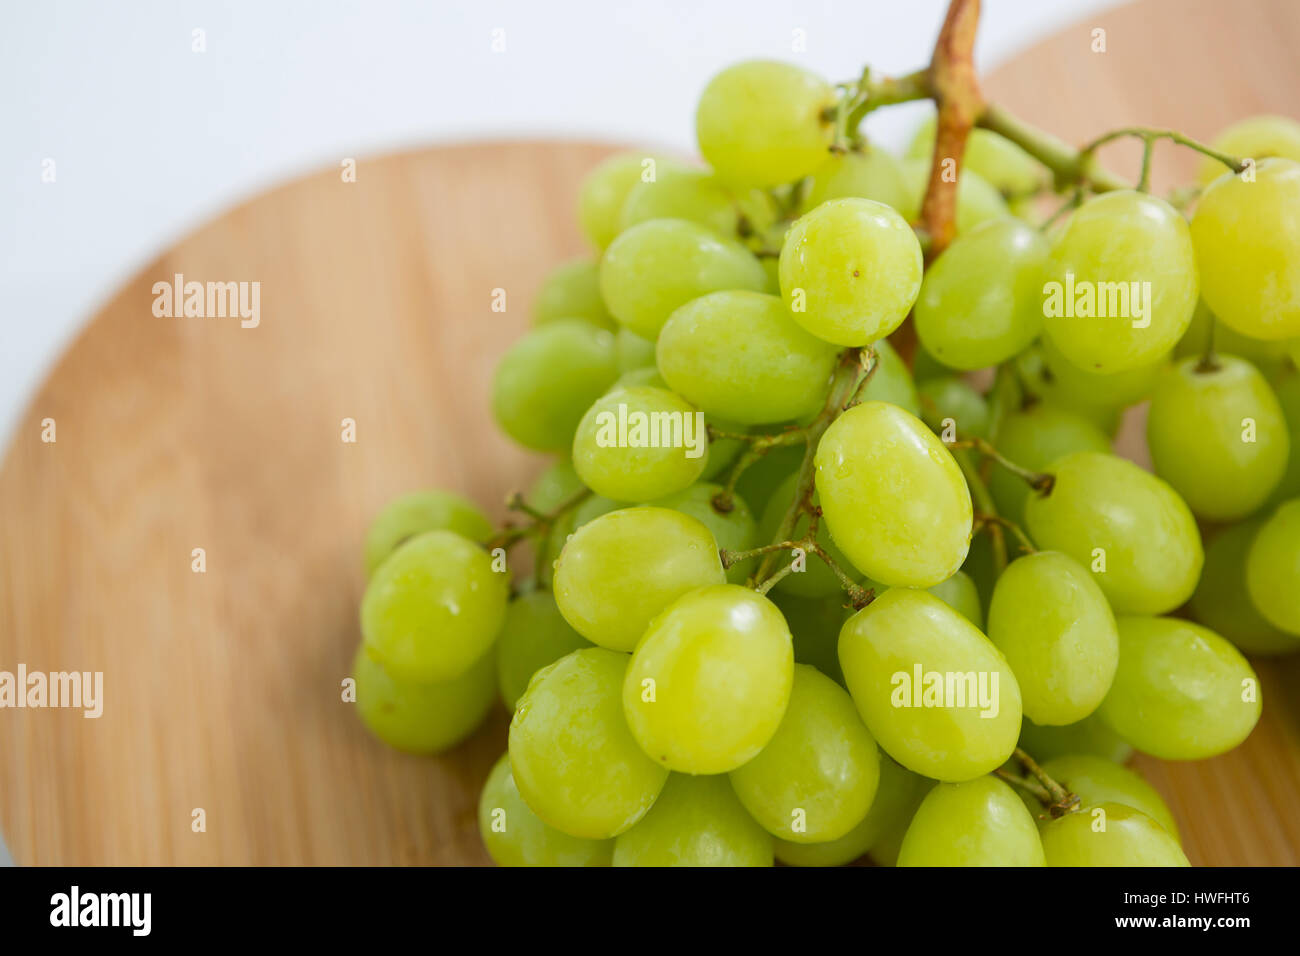 Close-up of green bunch of grapes on chopping board against white background Stock Photo